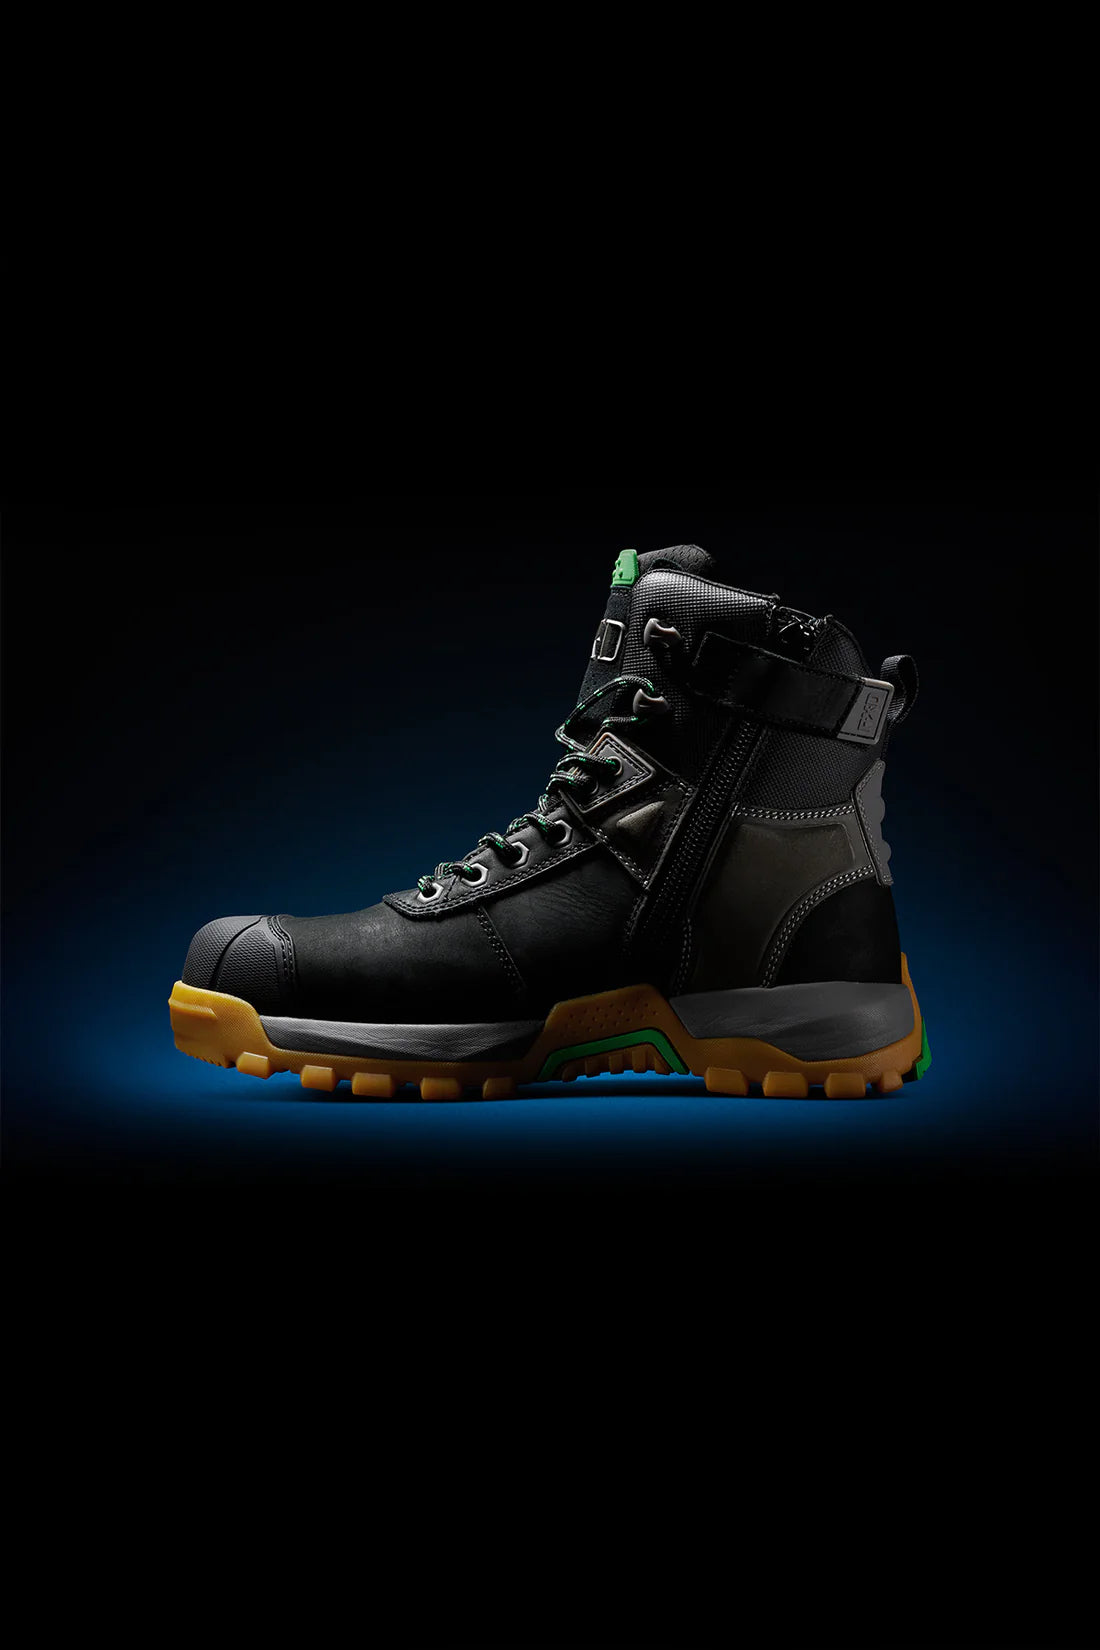 High Zip Sided High Cut Safety Boots - made by FXD Footwear